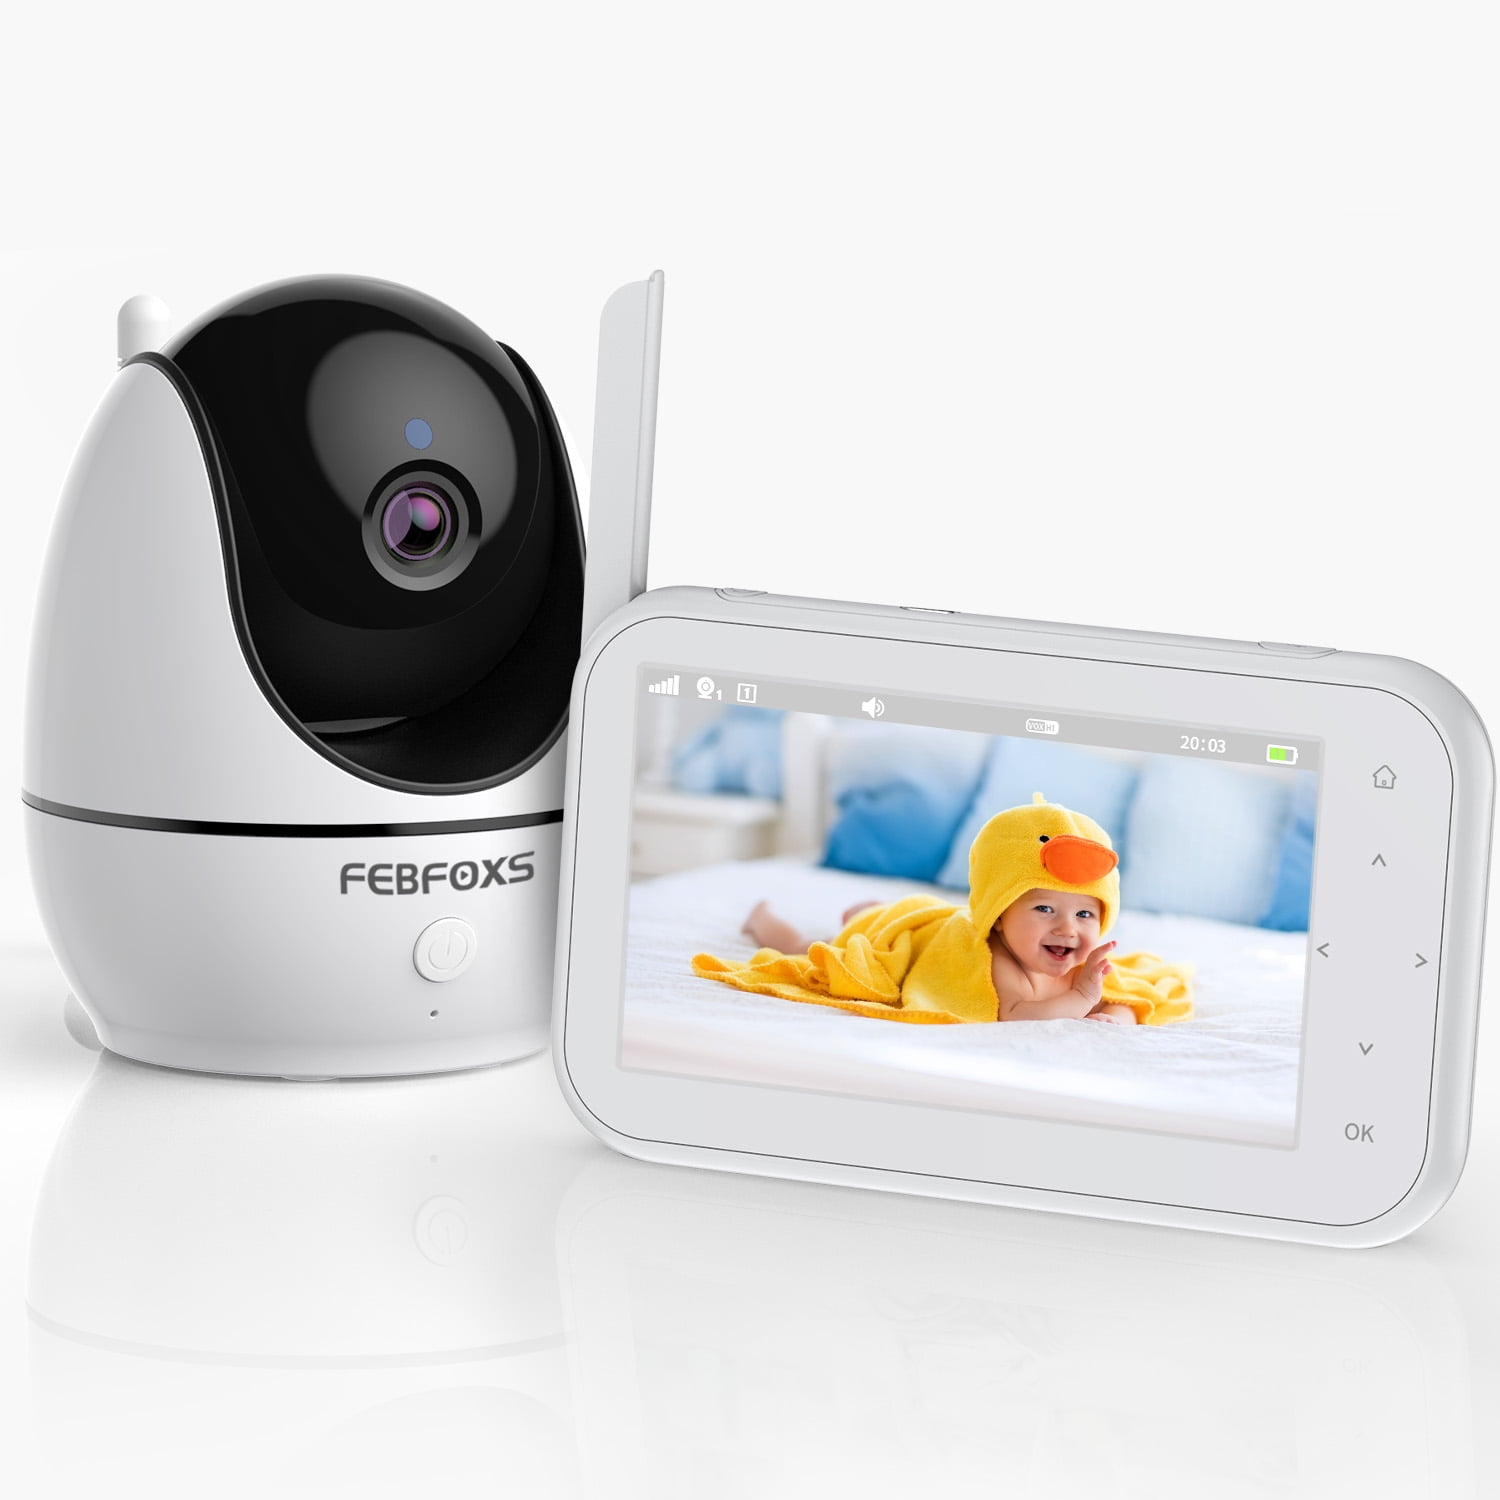 BOIFUN Baby Monitor with Remote Pan-Tilt-Zoom, 1080P, Cry and